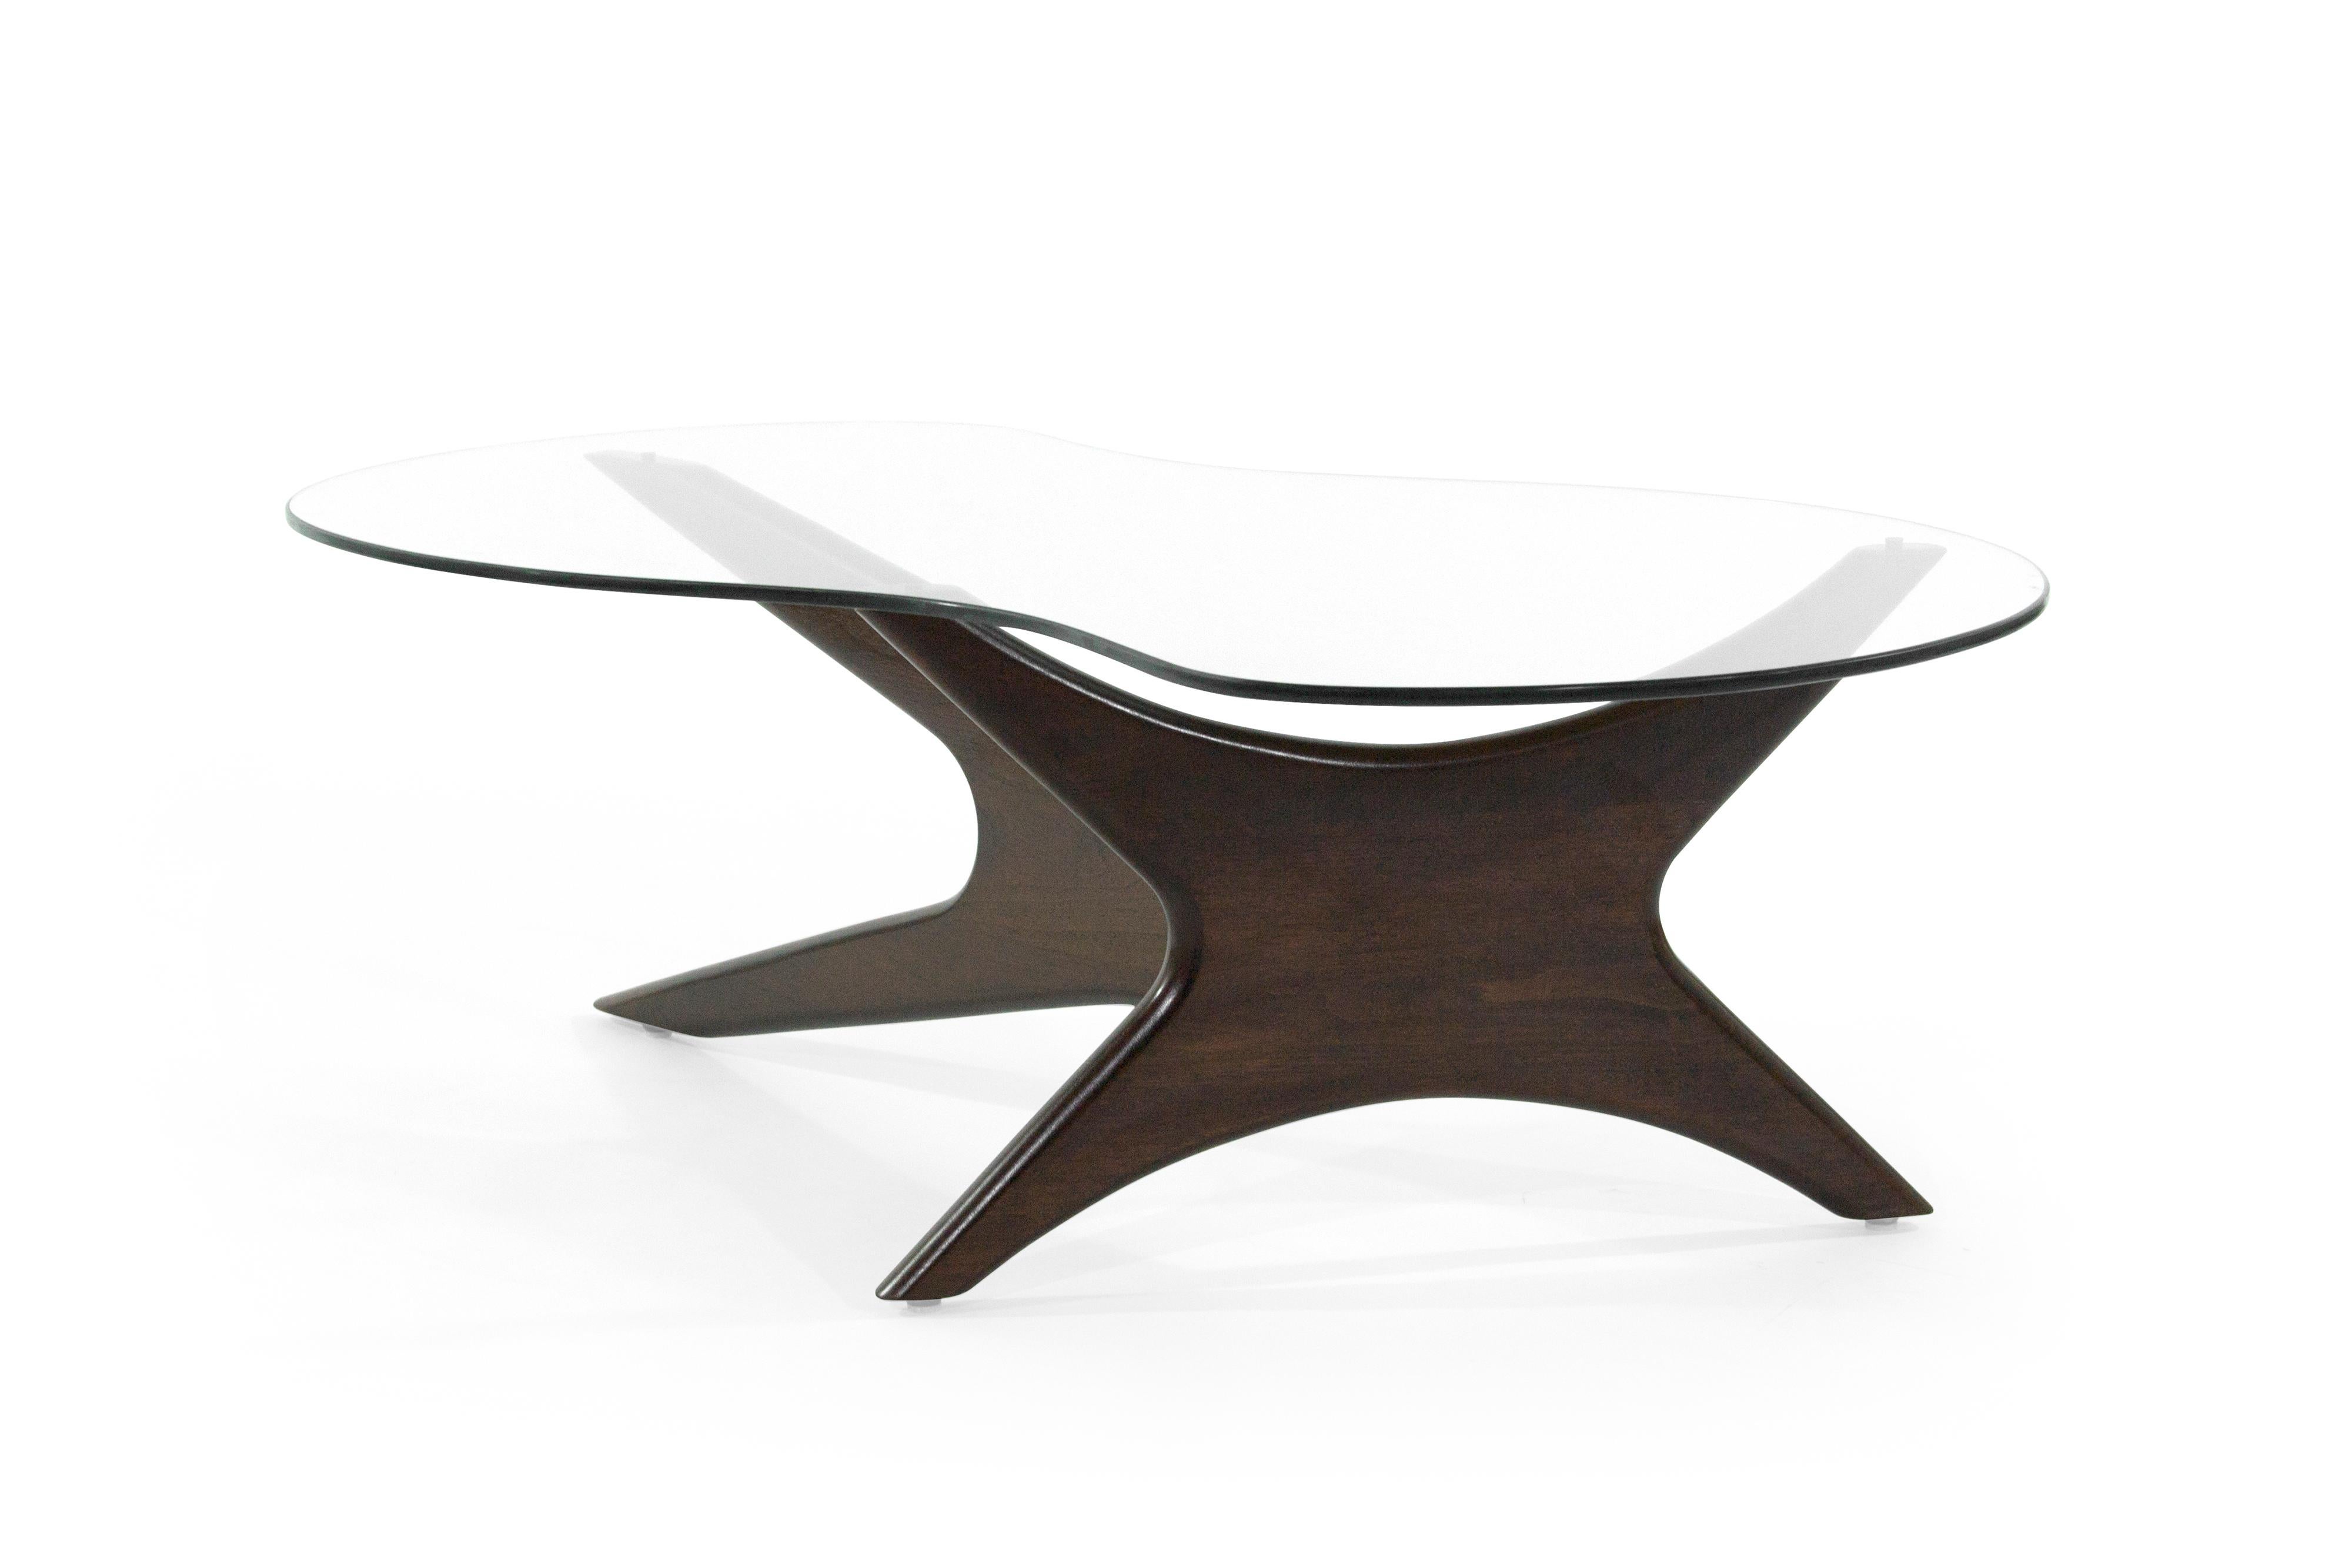 American Asymmetrical Walnut Cocktail Table by Adrian Pearsall